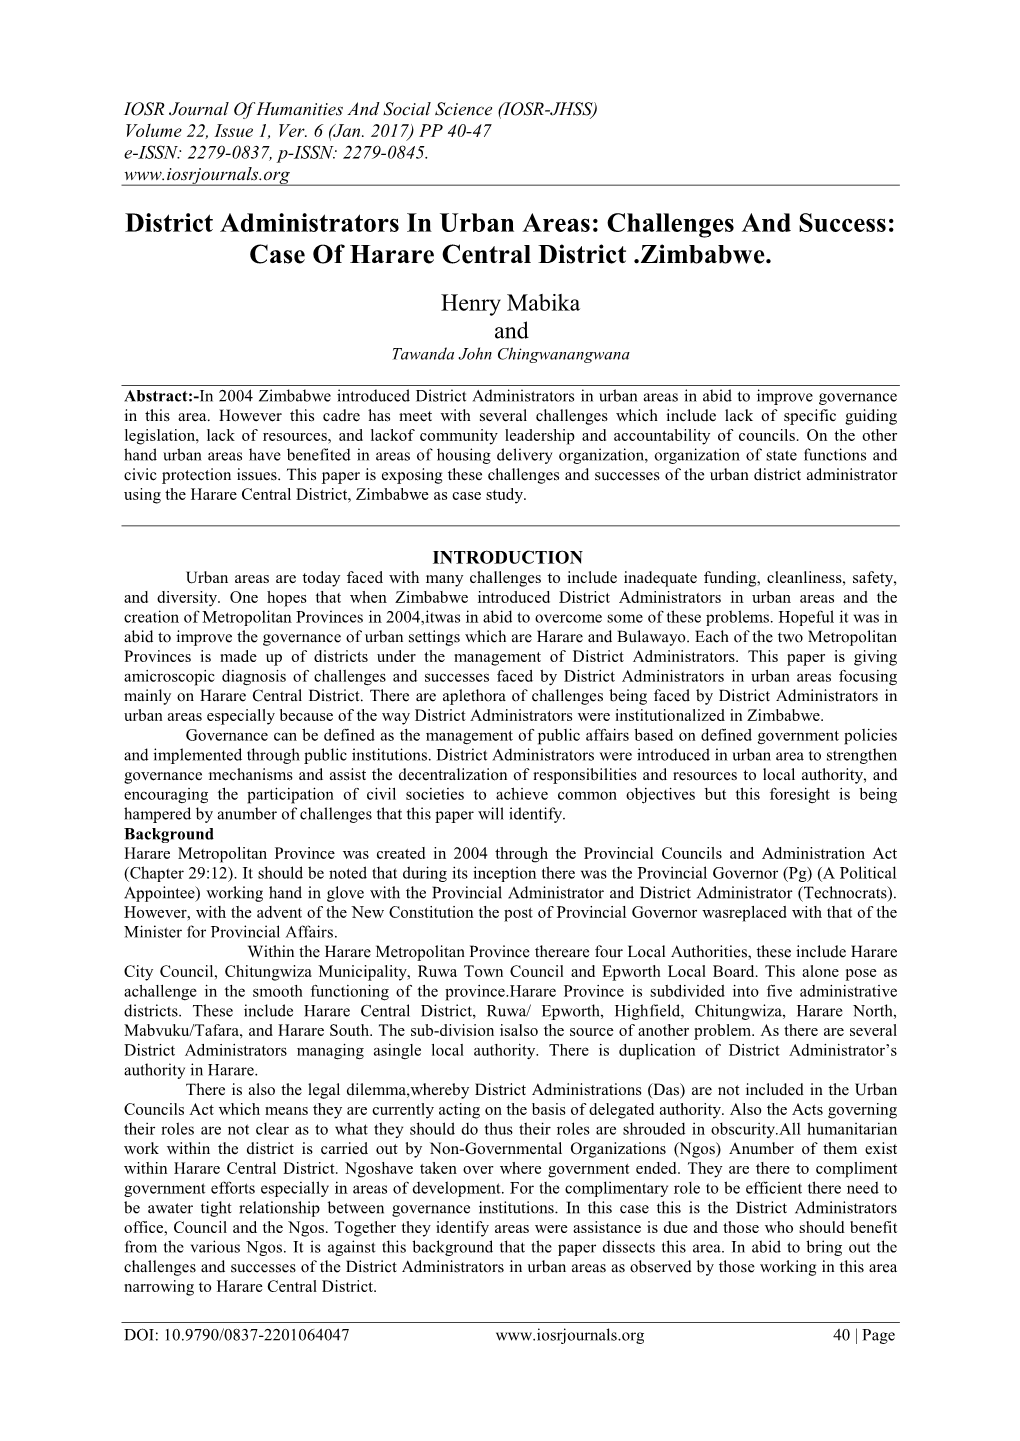 Case of Harare Central District .Zimbabwe